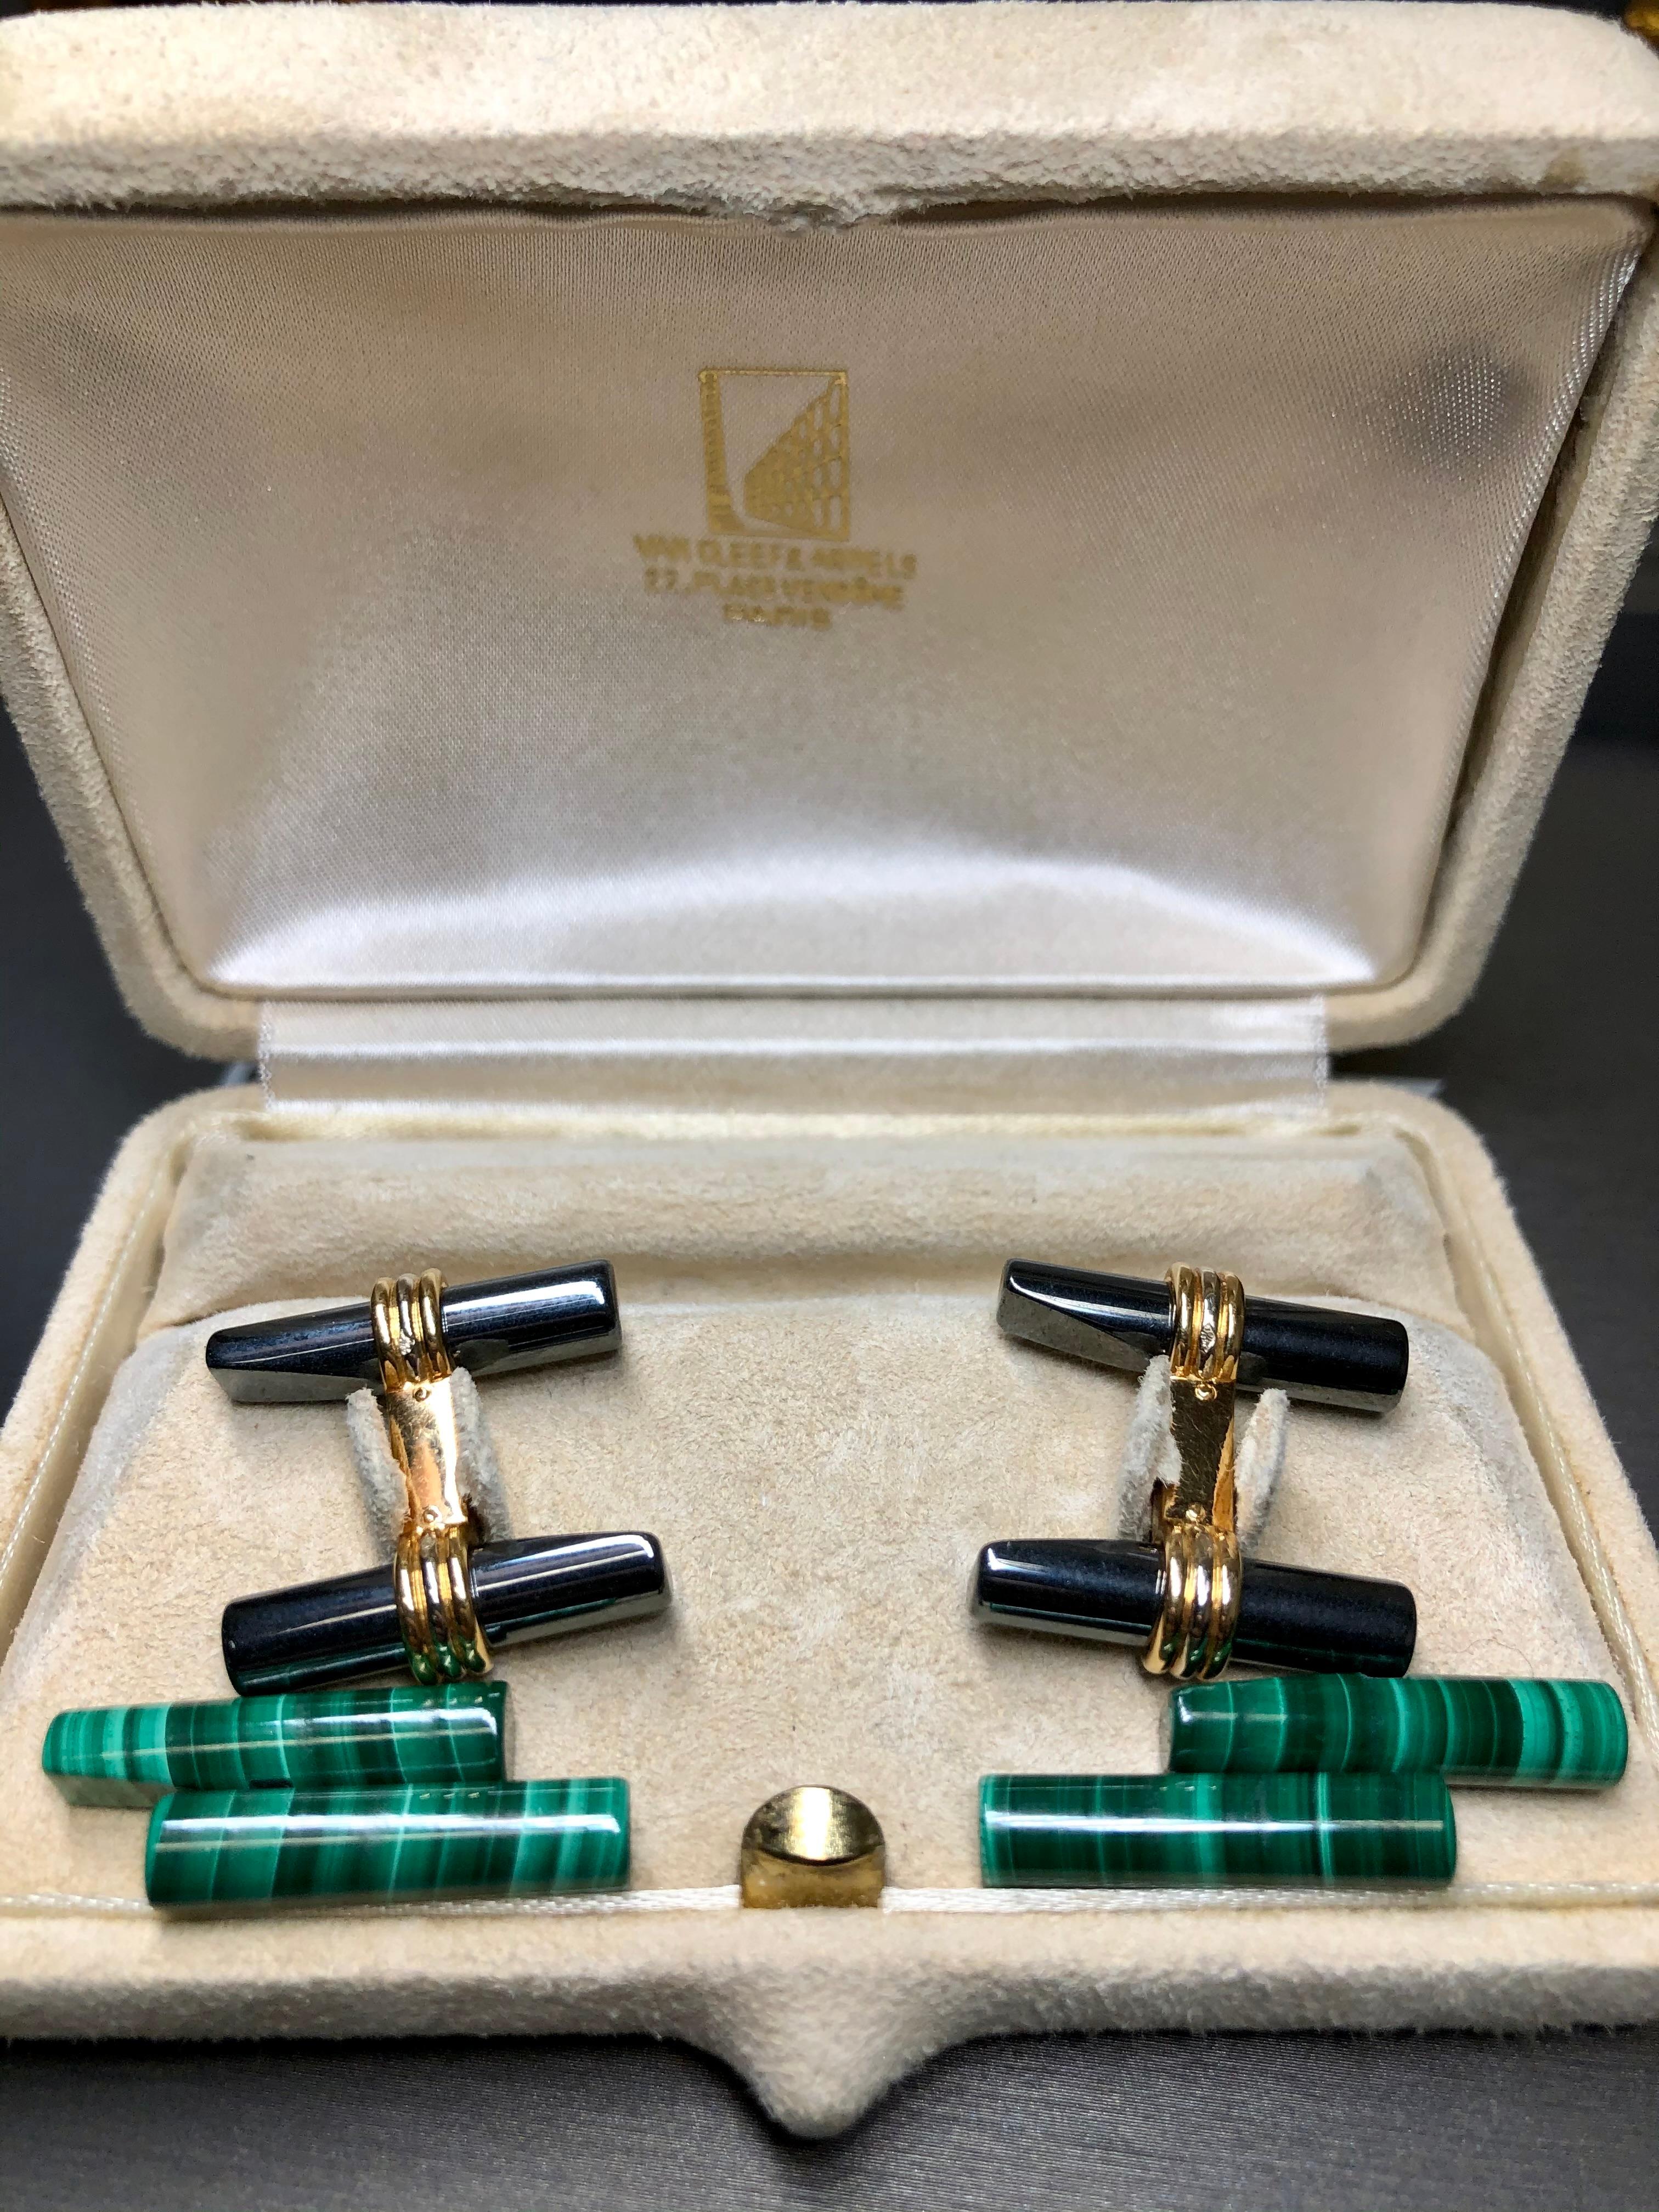 An original pair of cufflinks by VAN CLEEF & ARPELS with changeable hematite and malachite sections. Cufflinks are accompanied by original box and Amex receipt attributing original ownership to someone in the Breitling family. Originally purchased